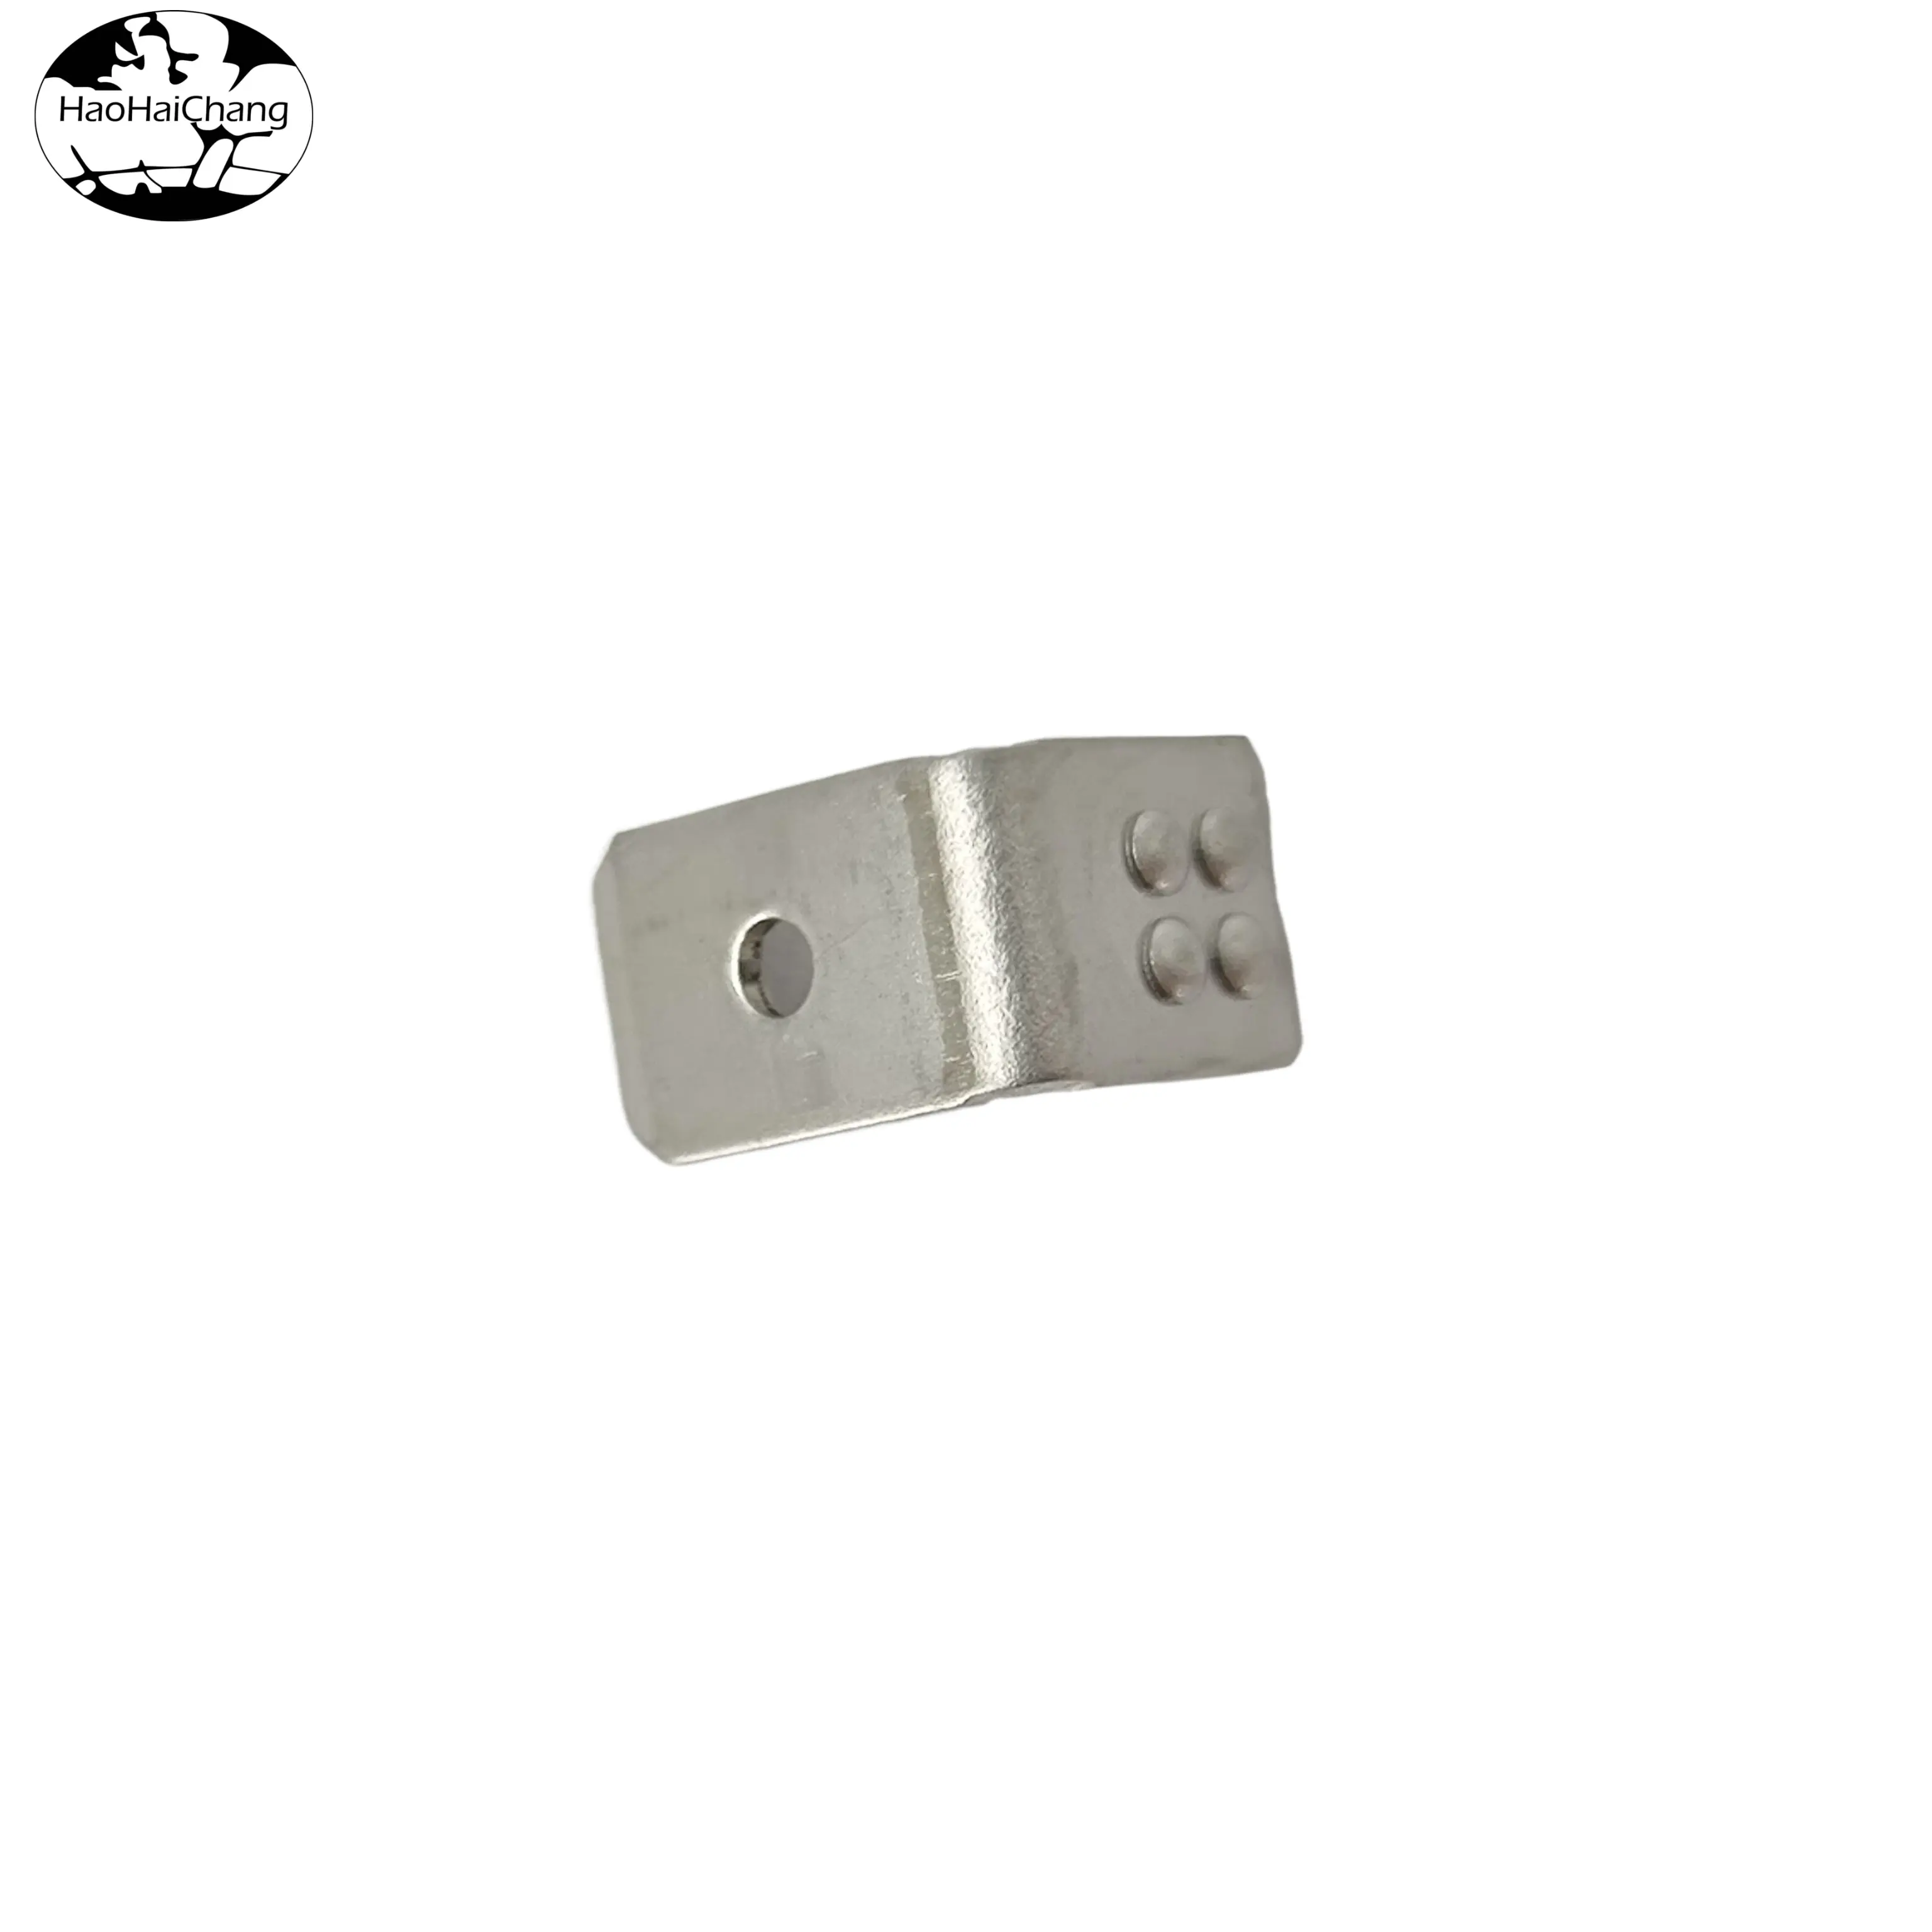 HHC-274 right angle bend 6.3 welding lug